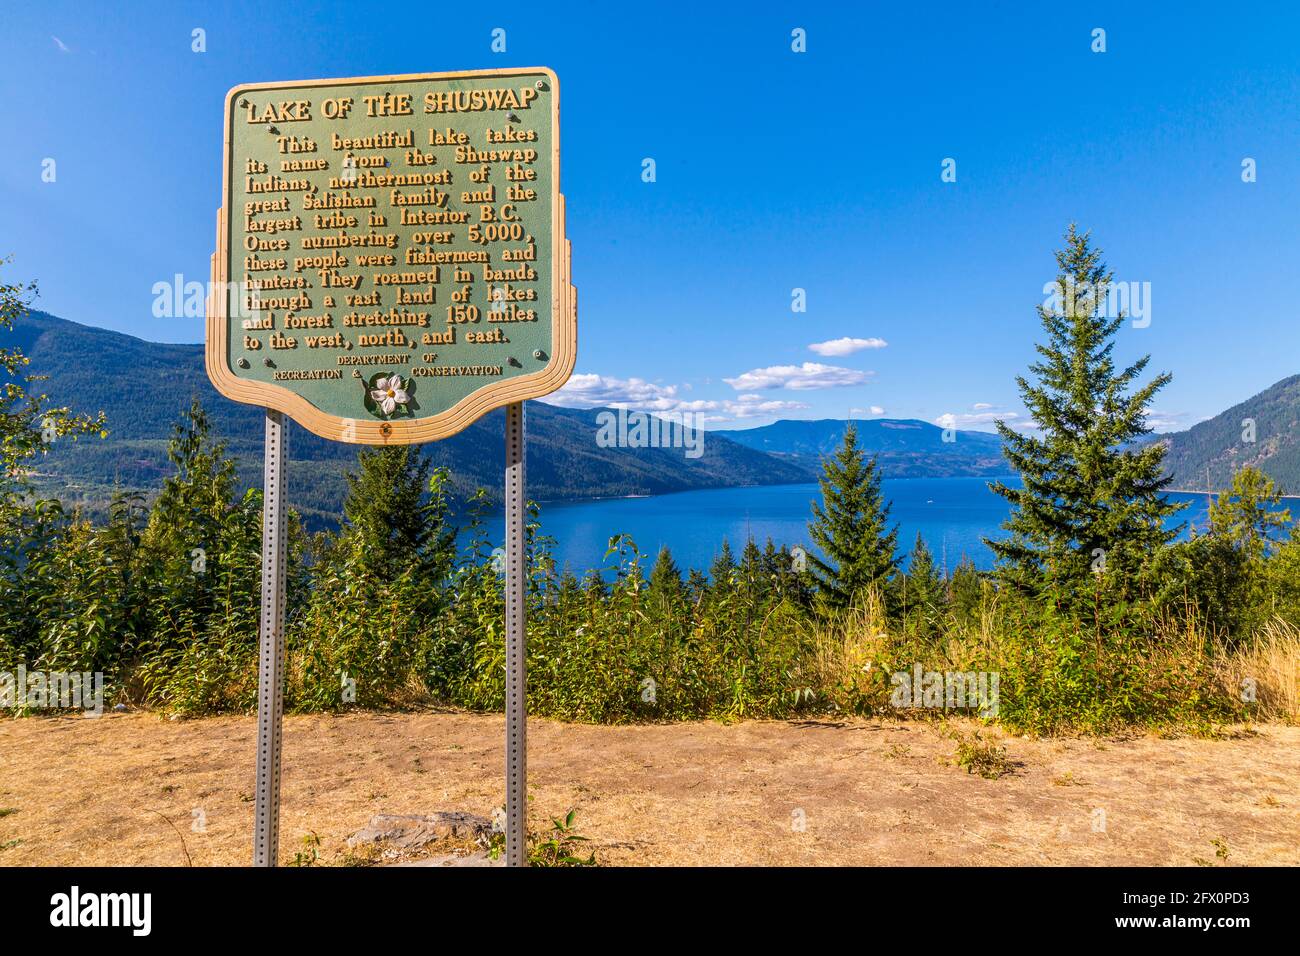 View of Lake of the Shuswap and signpost near Kamloops, British Columbia, Canada, North America Stock Photo